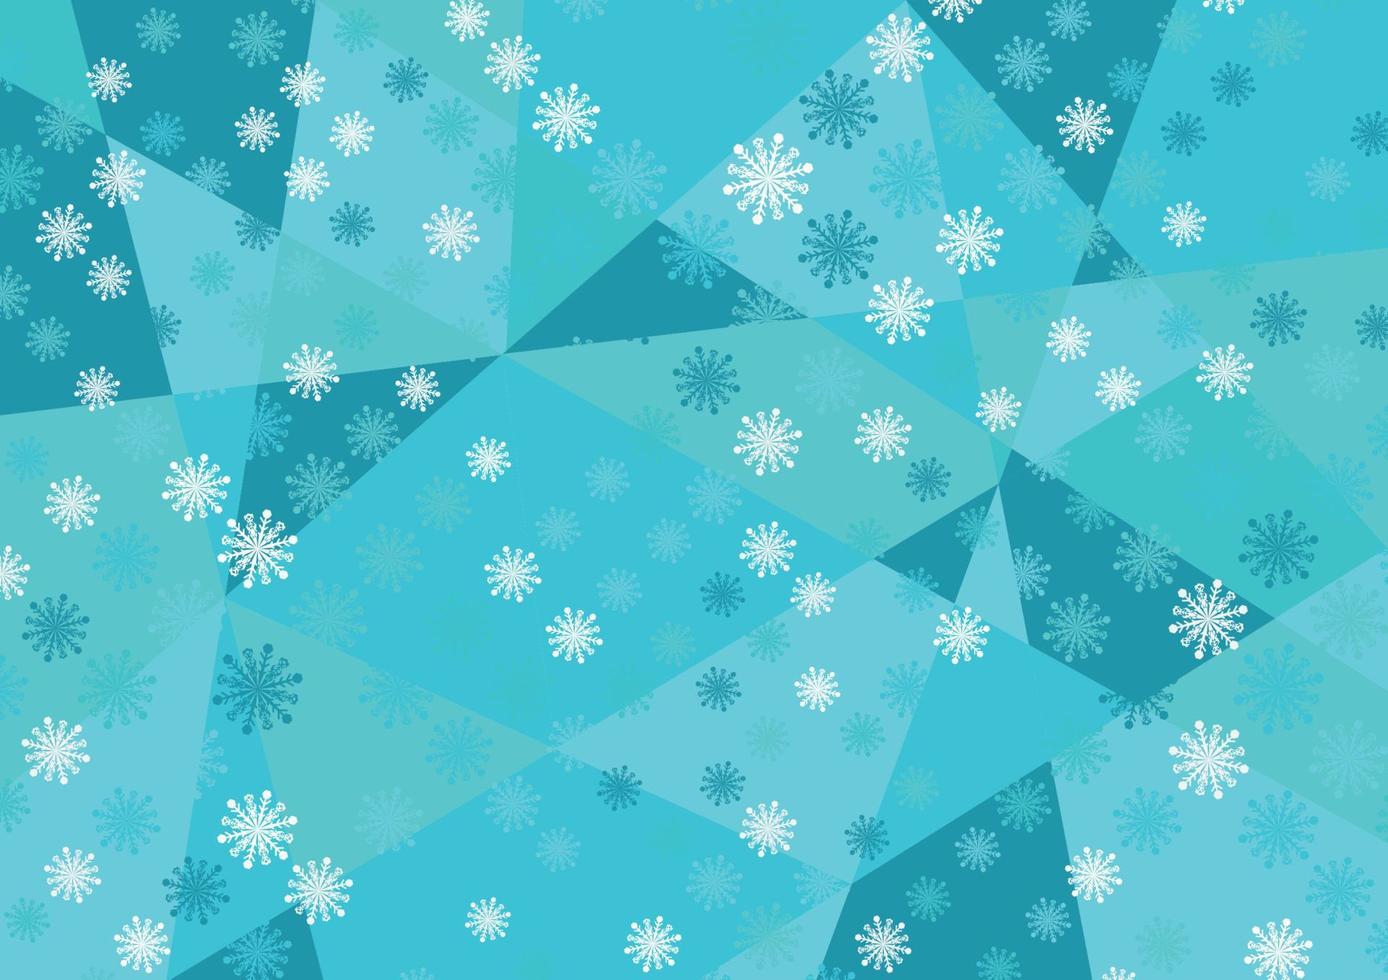 Abstract Background, polka dot Snowflakes, on a triangular pattern, vector illustration.